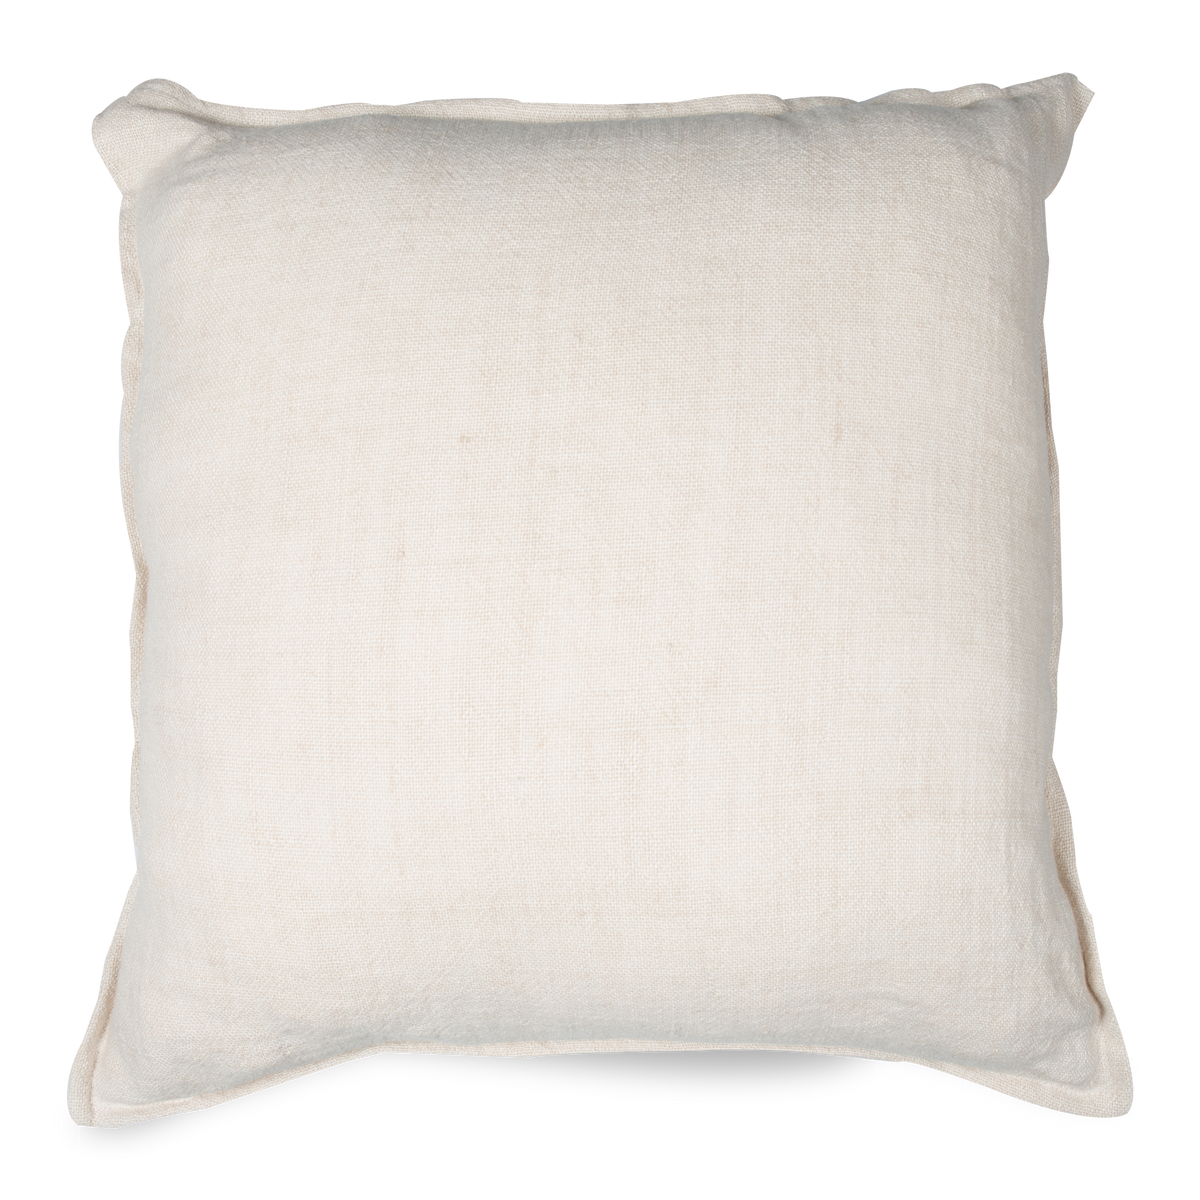 These pillows are made from pure 100% linen, rich in character and texture, enhanced by the flanged edge.